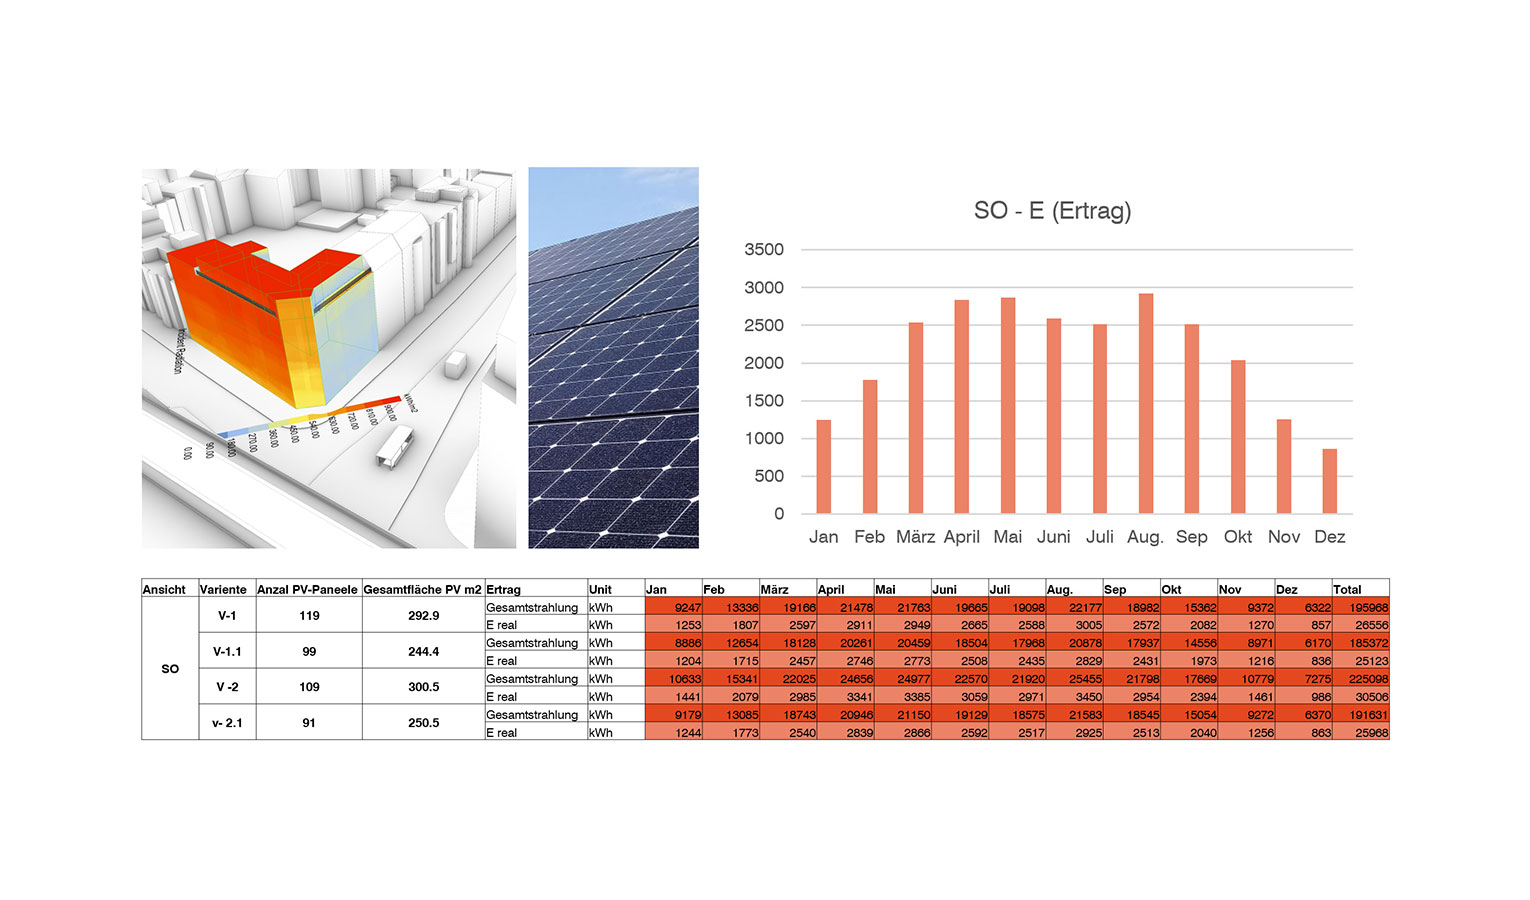 Advice on the use of building-integrated PV systems